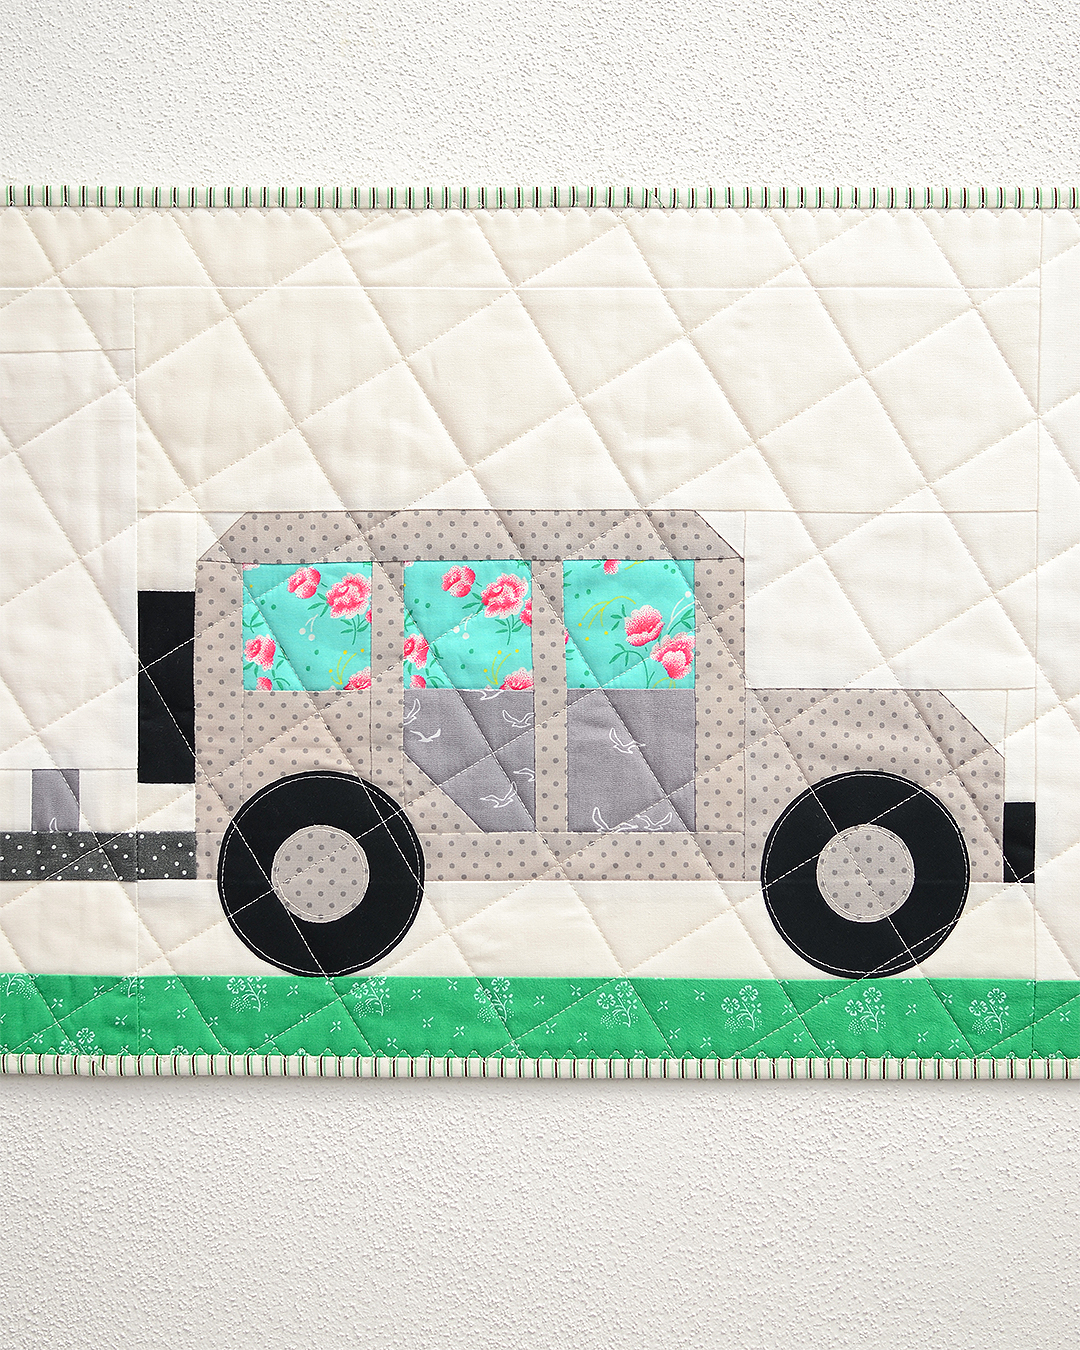 Happy Camper table runner quilt pattern - Camping quilt patterns